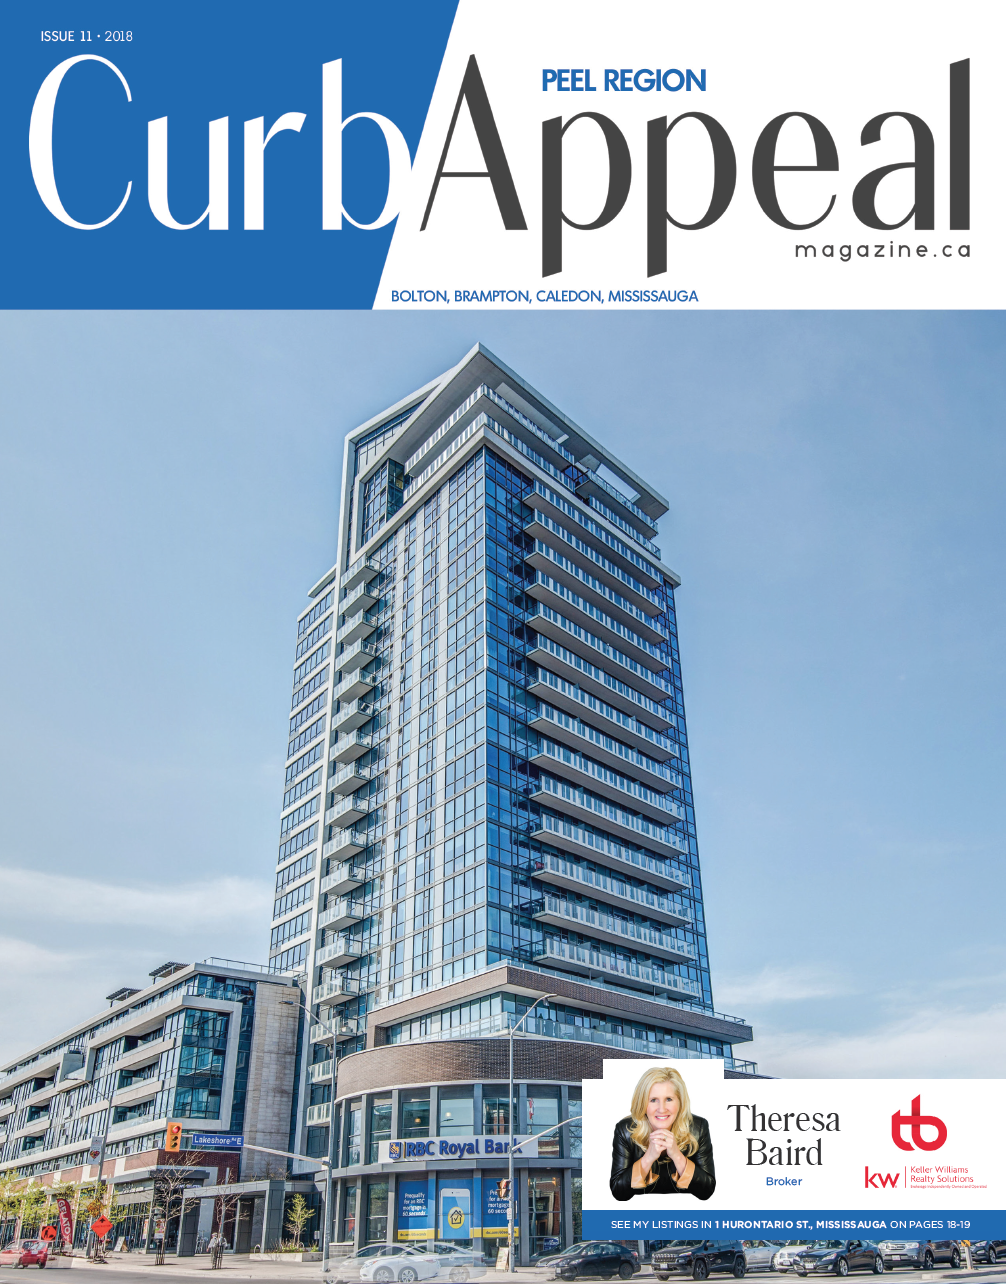 Curb Appeal Magazine Cover - Mississauga